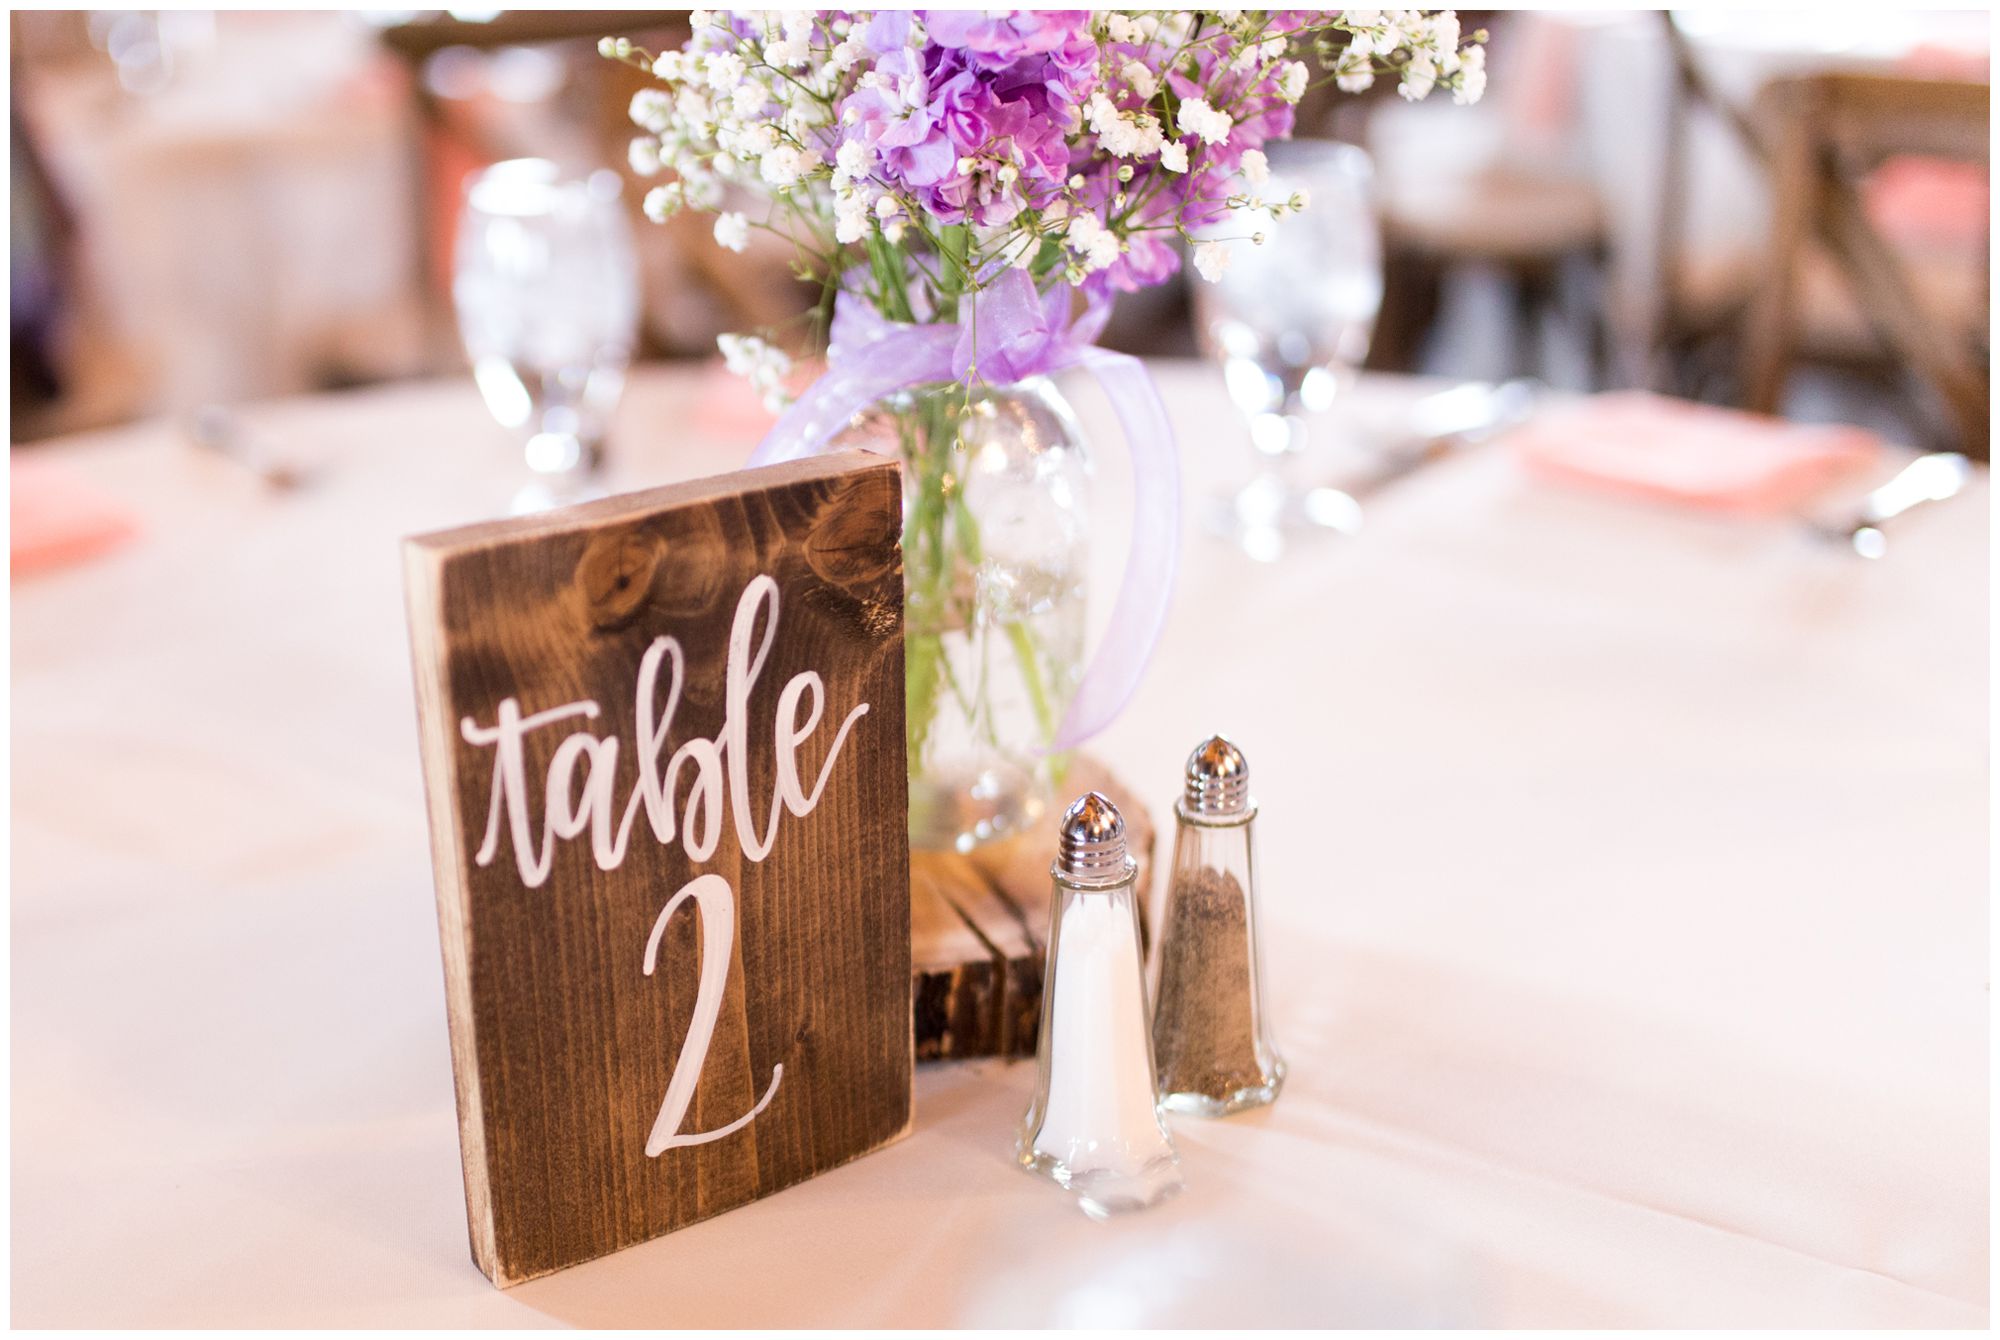 Mustard Seed Gardens wedding reception rustic table decor in Noblesville Indiana